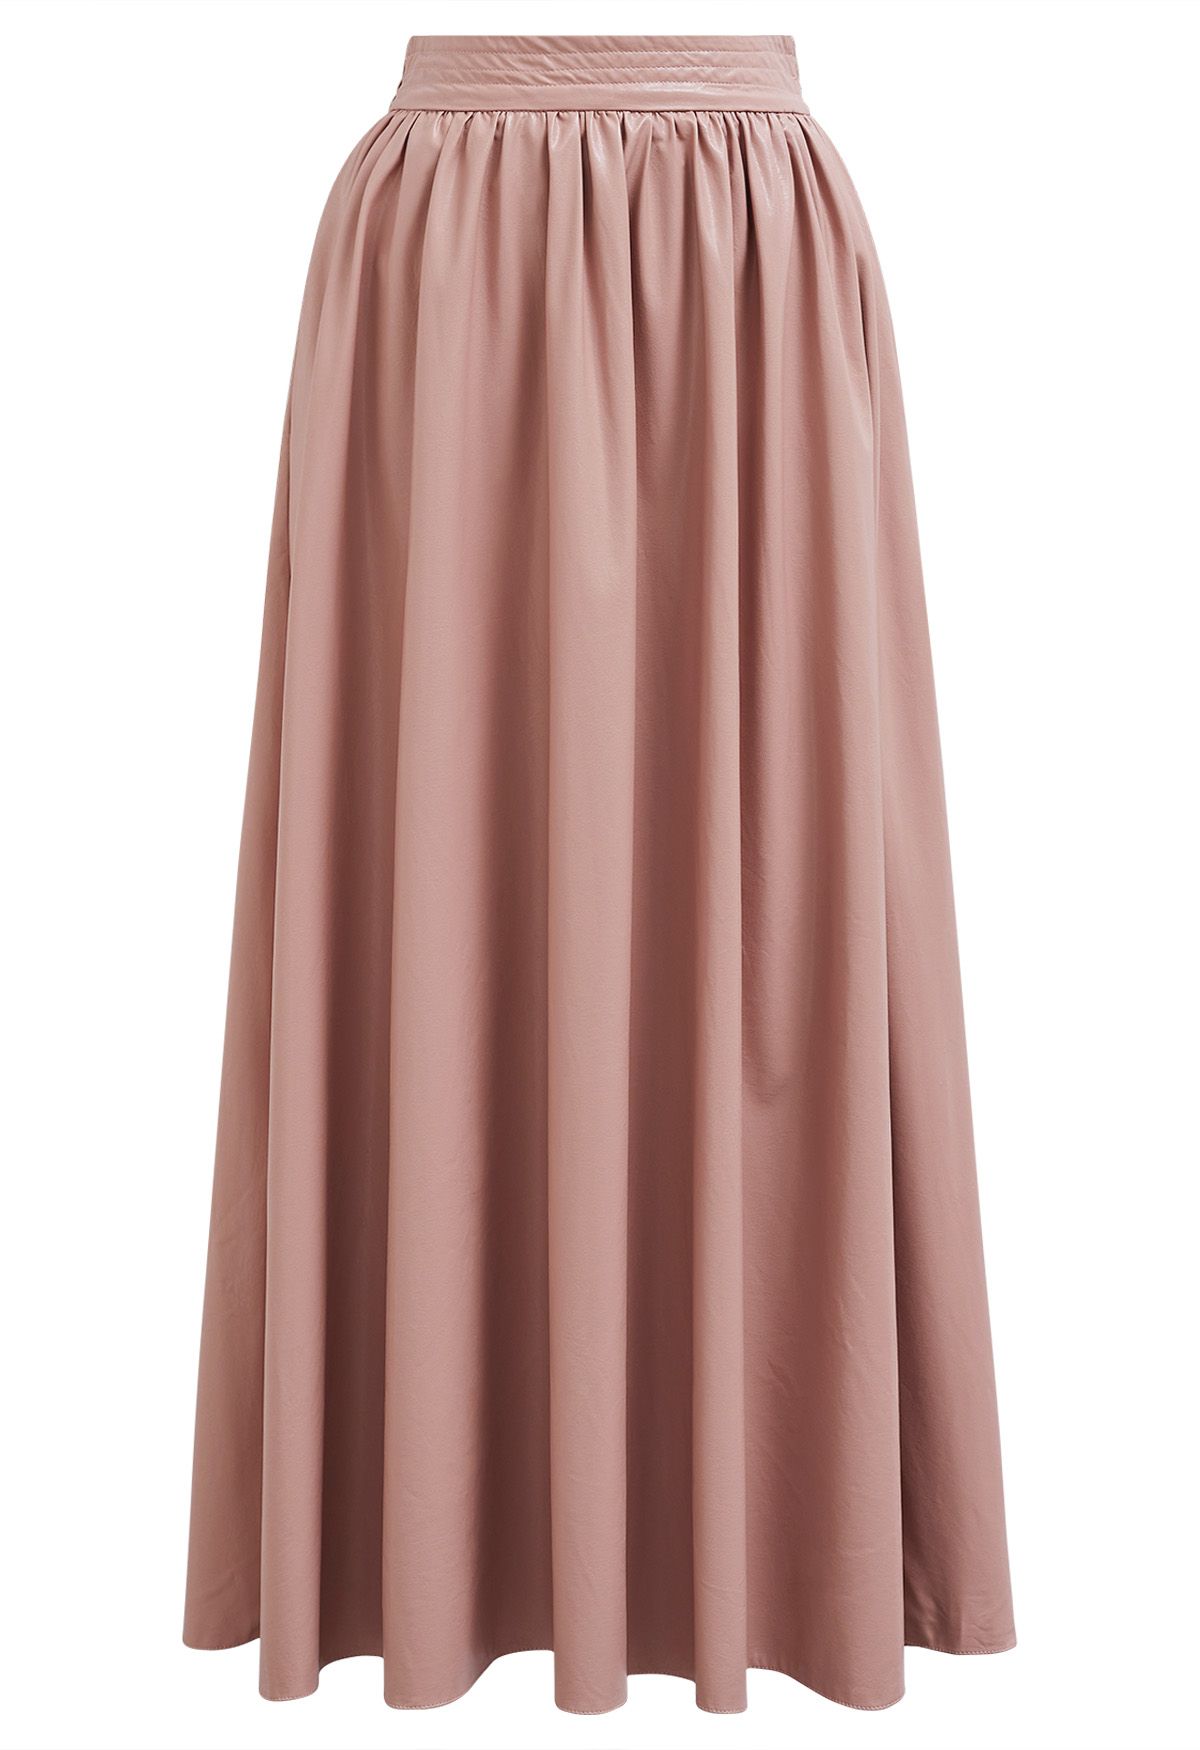 Refined Simplicity Faux Leather Maxi Skirt in Pink